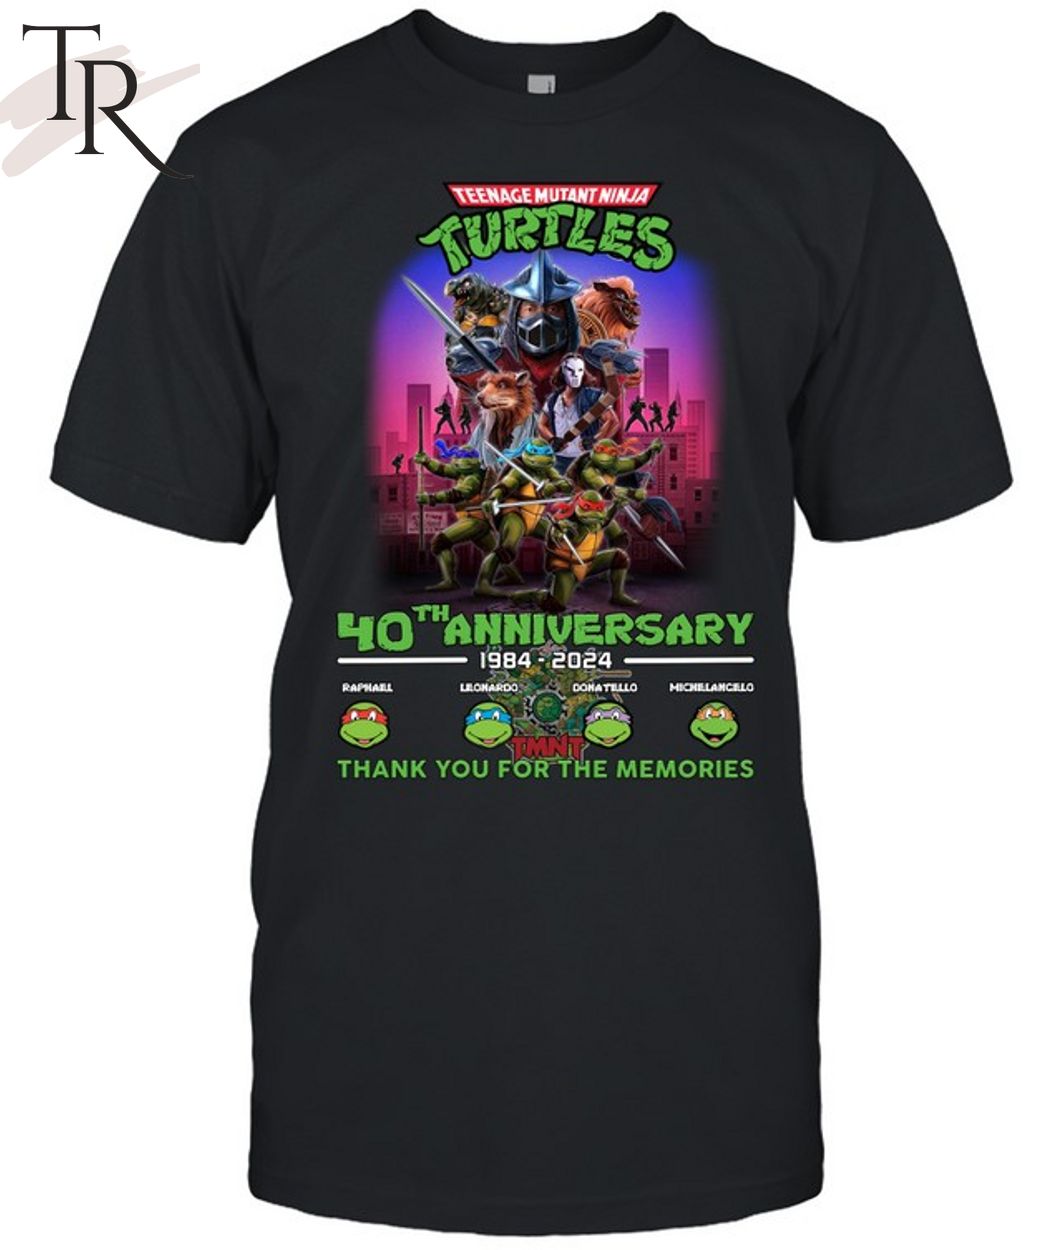 https://images.torunstyle.com/wp-content/uploads/2023/08/20053819/tmn-turtles-40th-anniversary-1984-2024-thank-you-for-the-memories-t-shirt-1-iYyXp.jpg